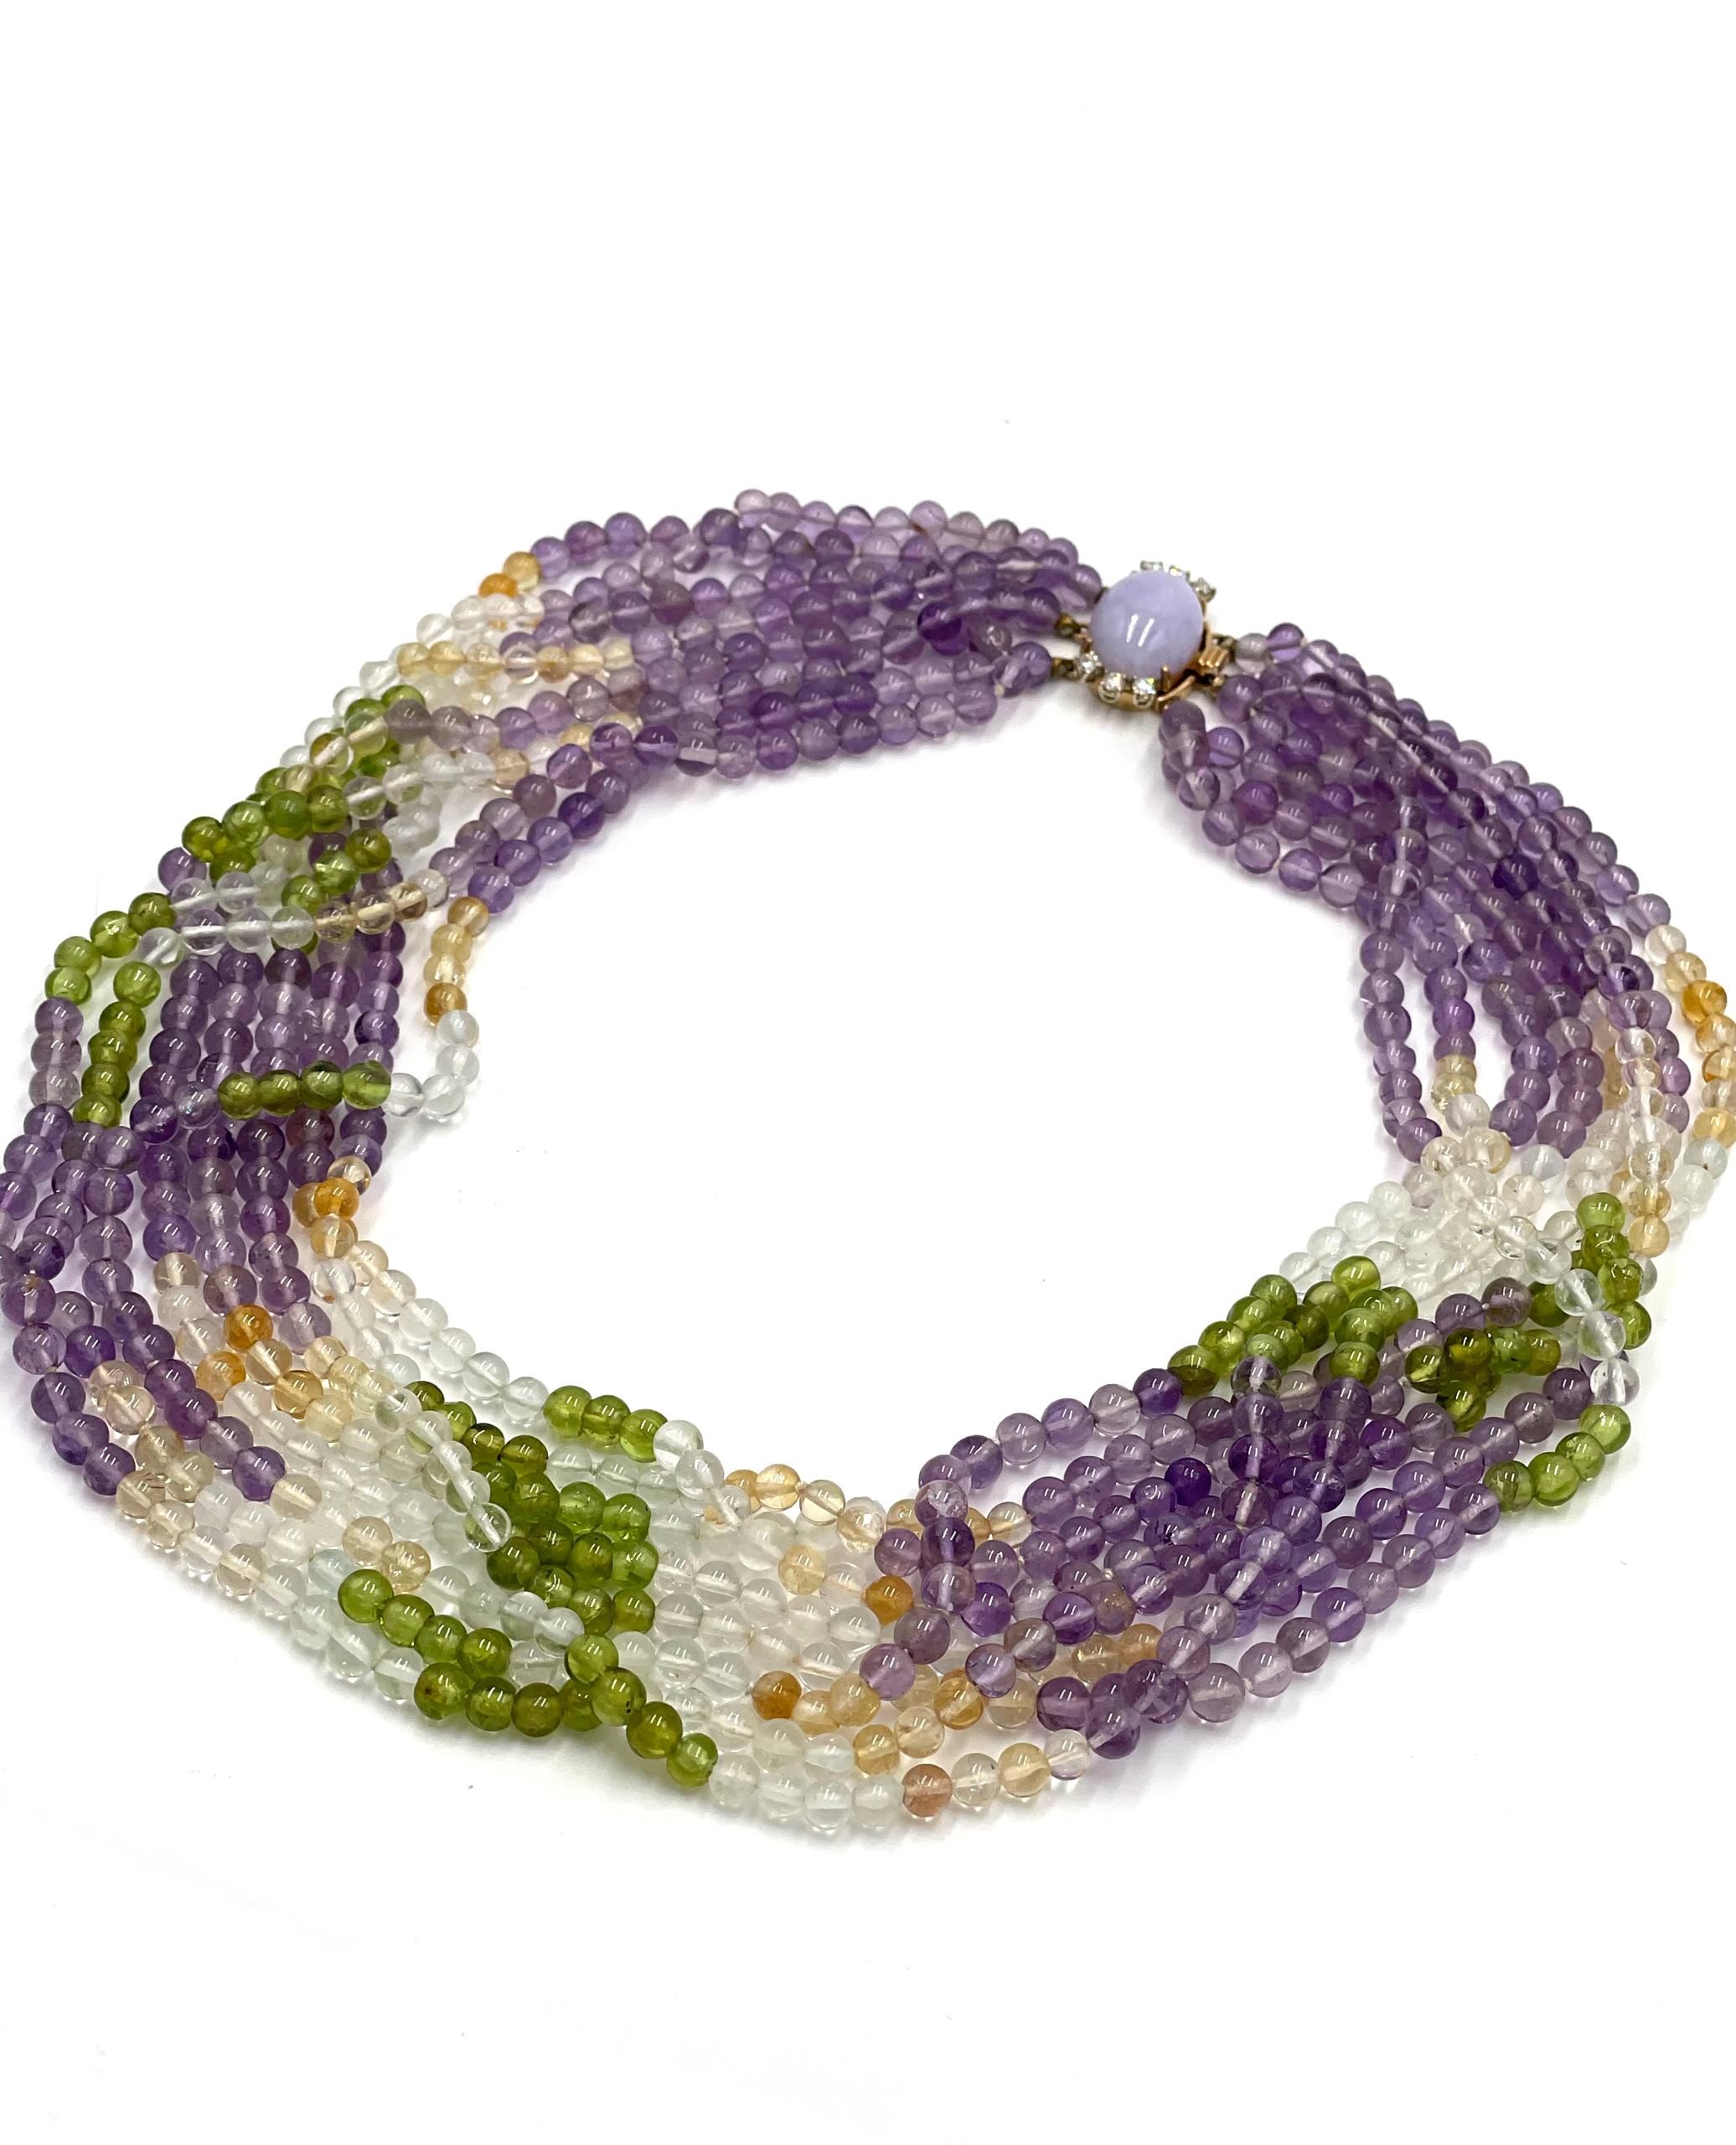 Pre owned vintage estate multi strand necklace consisting of 4.7-5mm beads made of amethyst, citrine, clear quartz and peridot.  The clasp is 14K white and yellow gold with one lavender jade measuring 17.5X13.0X7.8mm and six round brilliant-cut